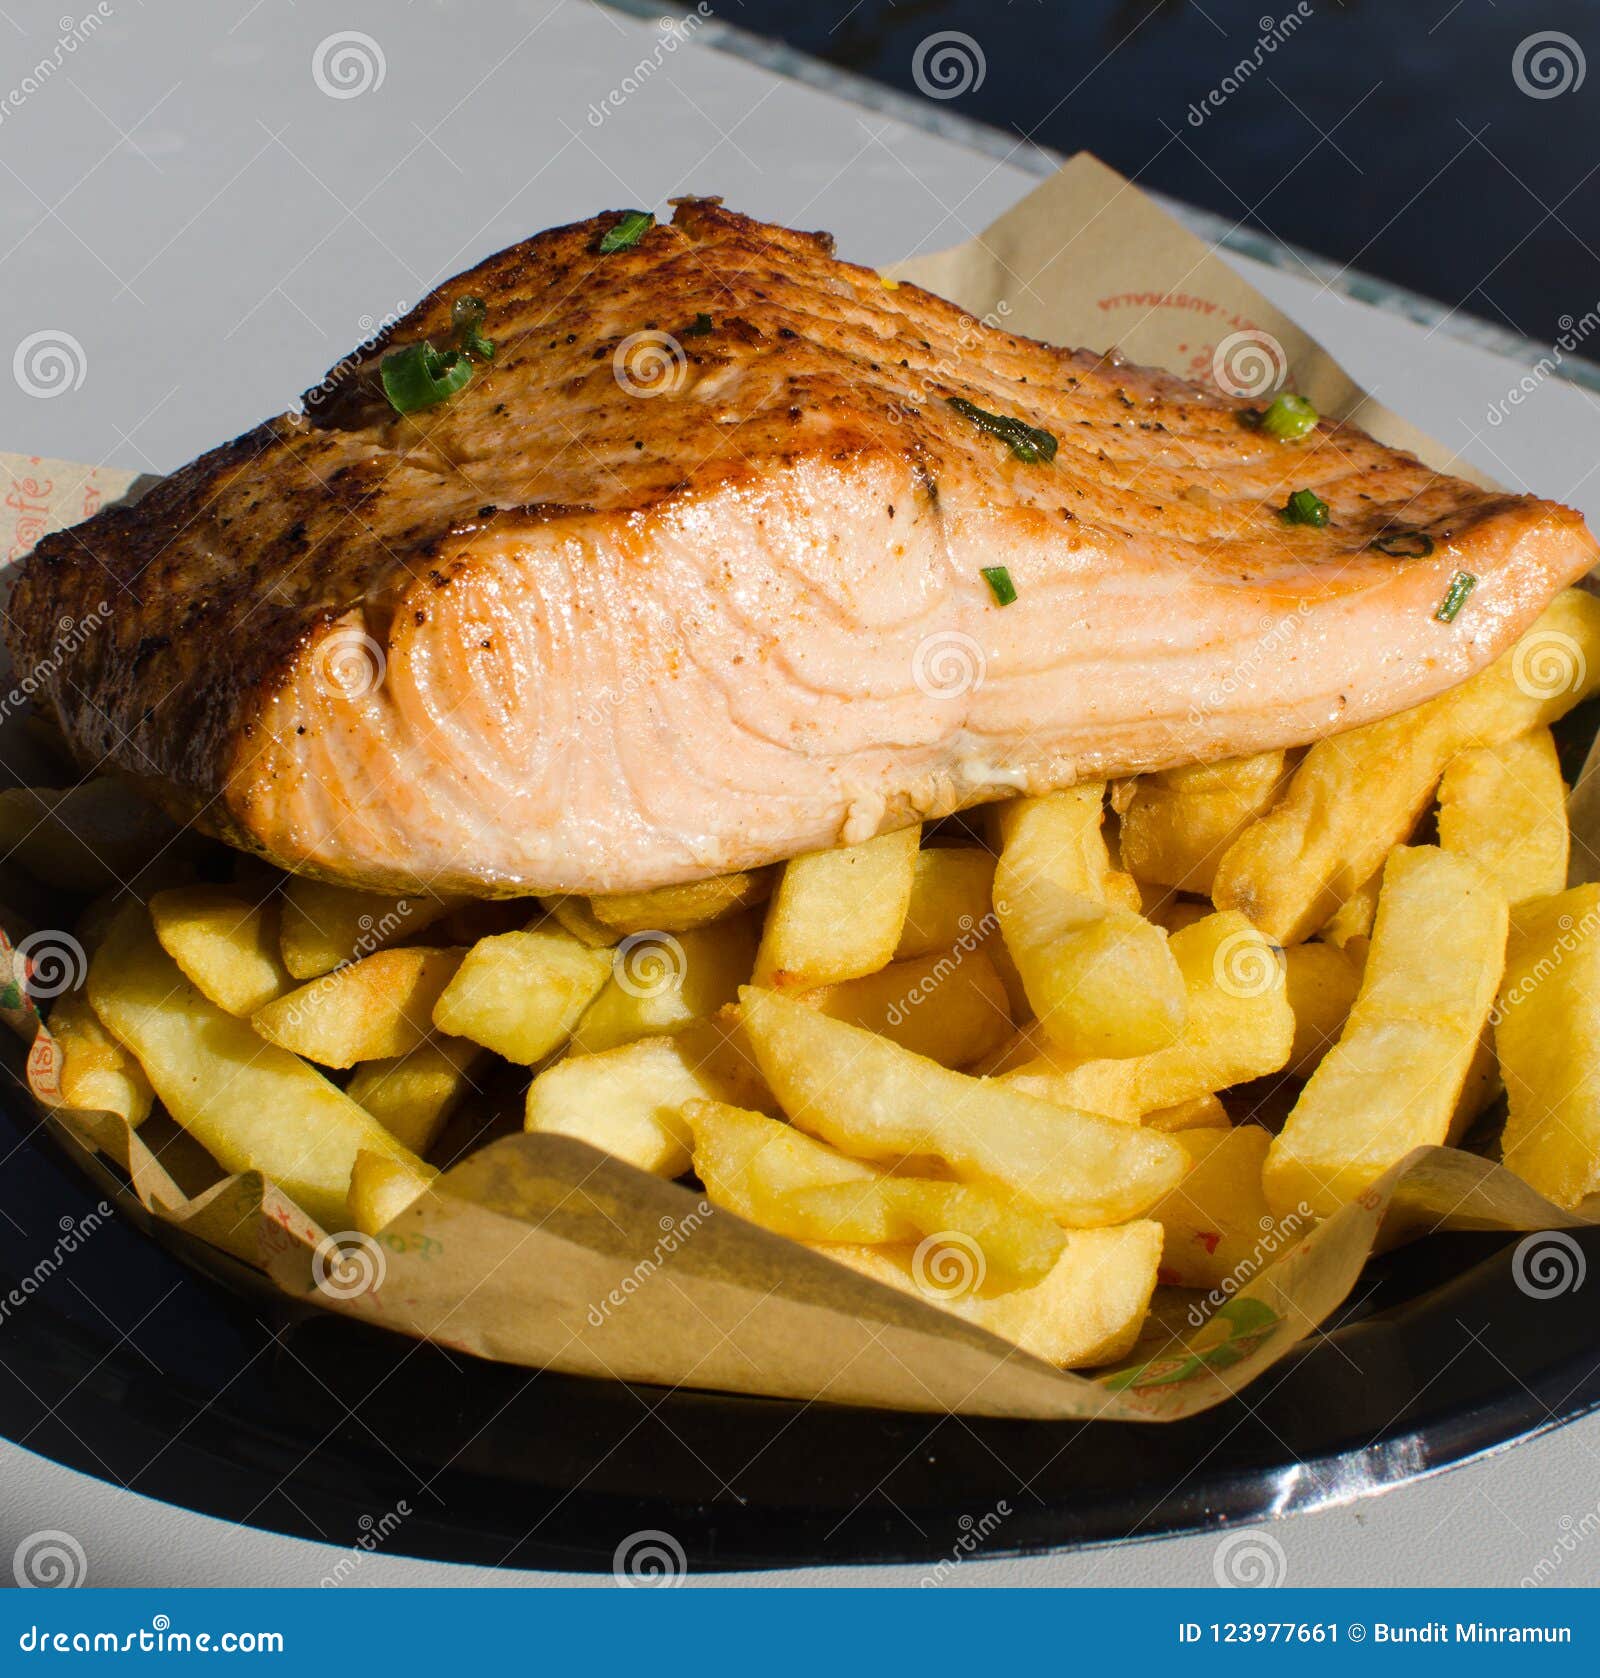 Grilled Salmon Fish with Chips on a Black Plastic Plate. Stock Image -  Image of fast, chip: 123977661